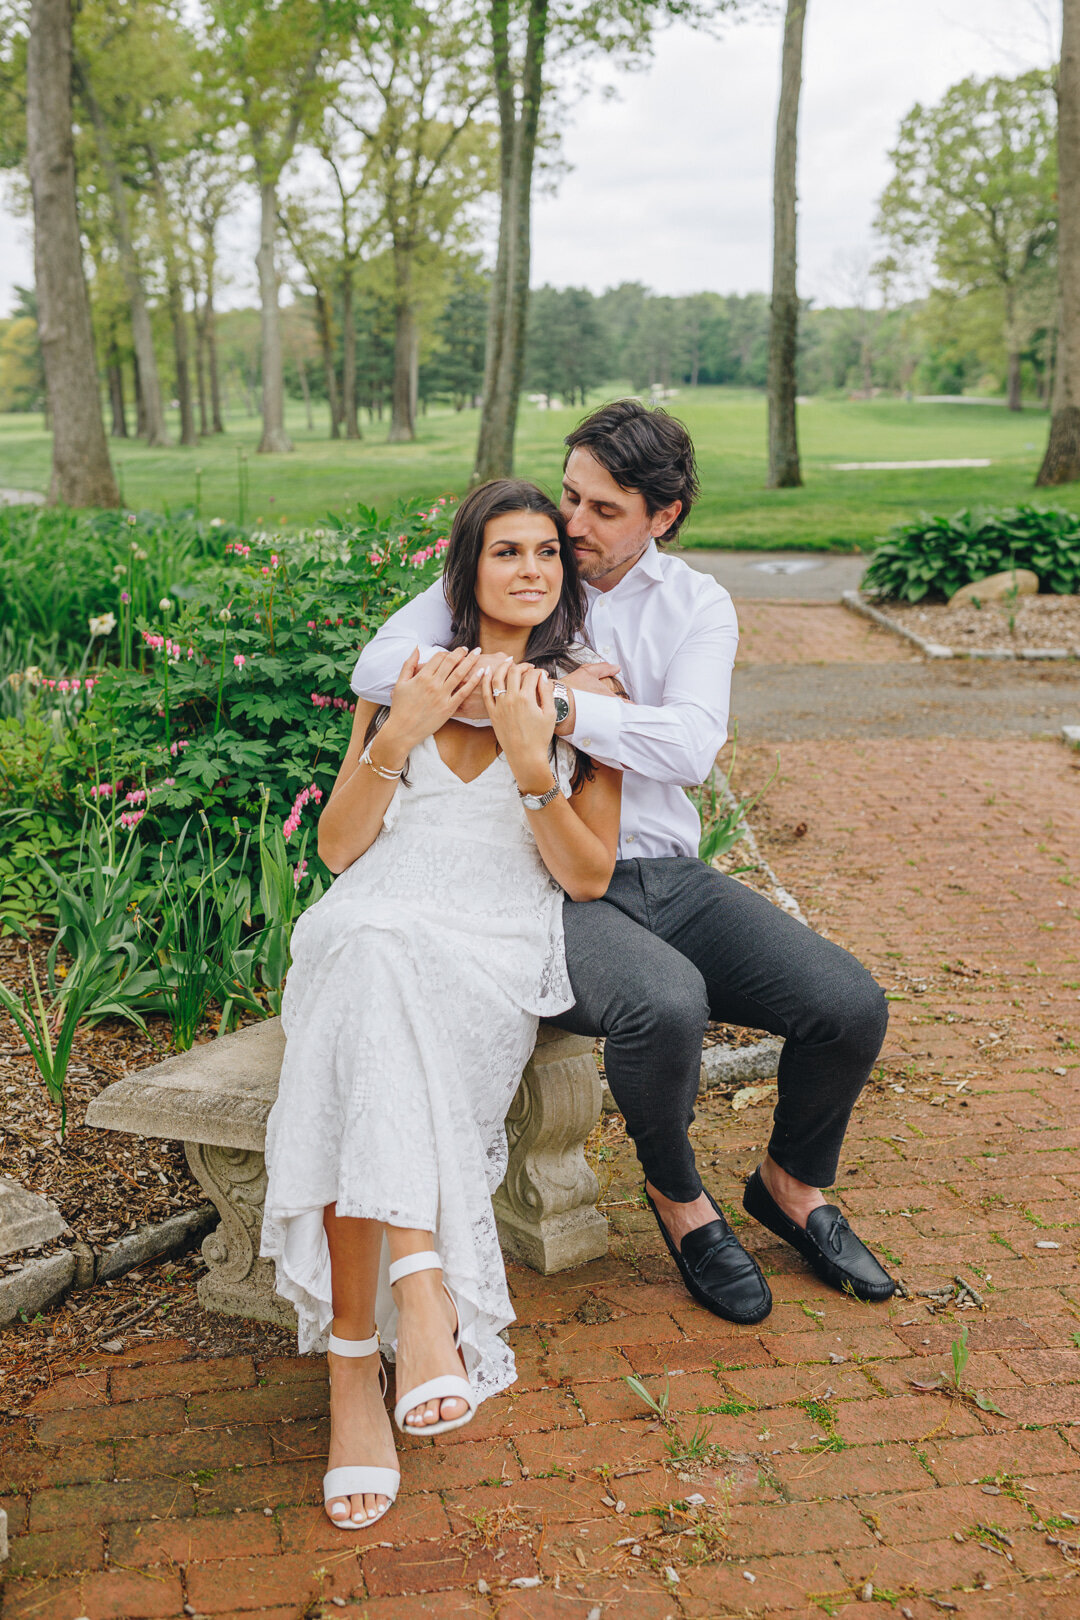 Alexa_Mark_The_Muttontown_Club_Engagement_Photography_EY3A6265